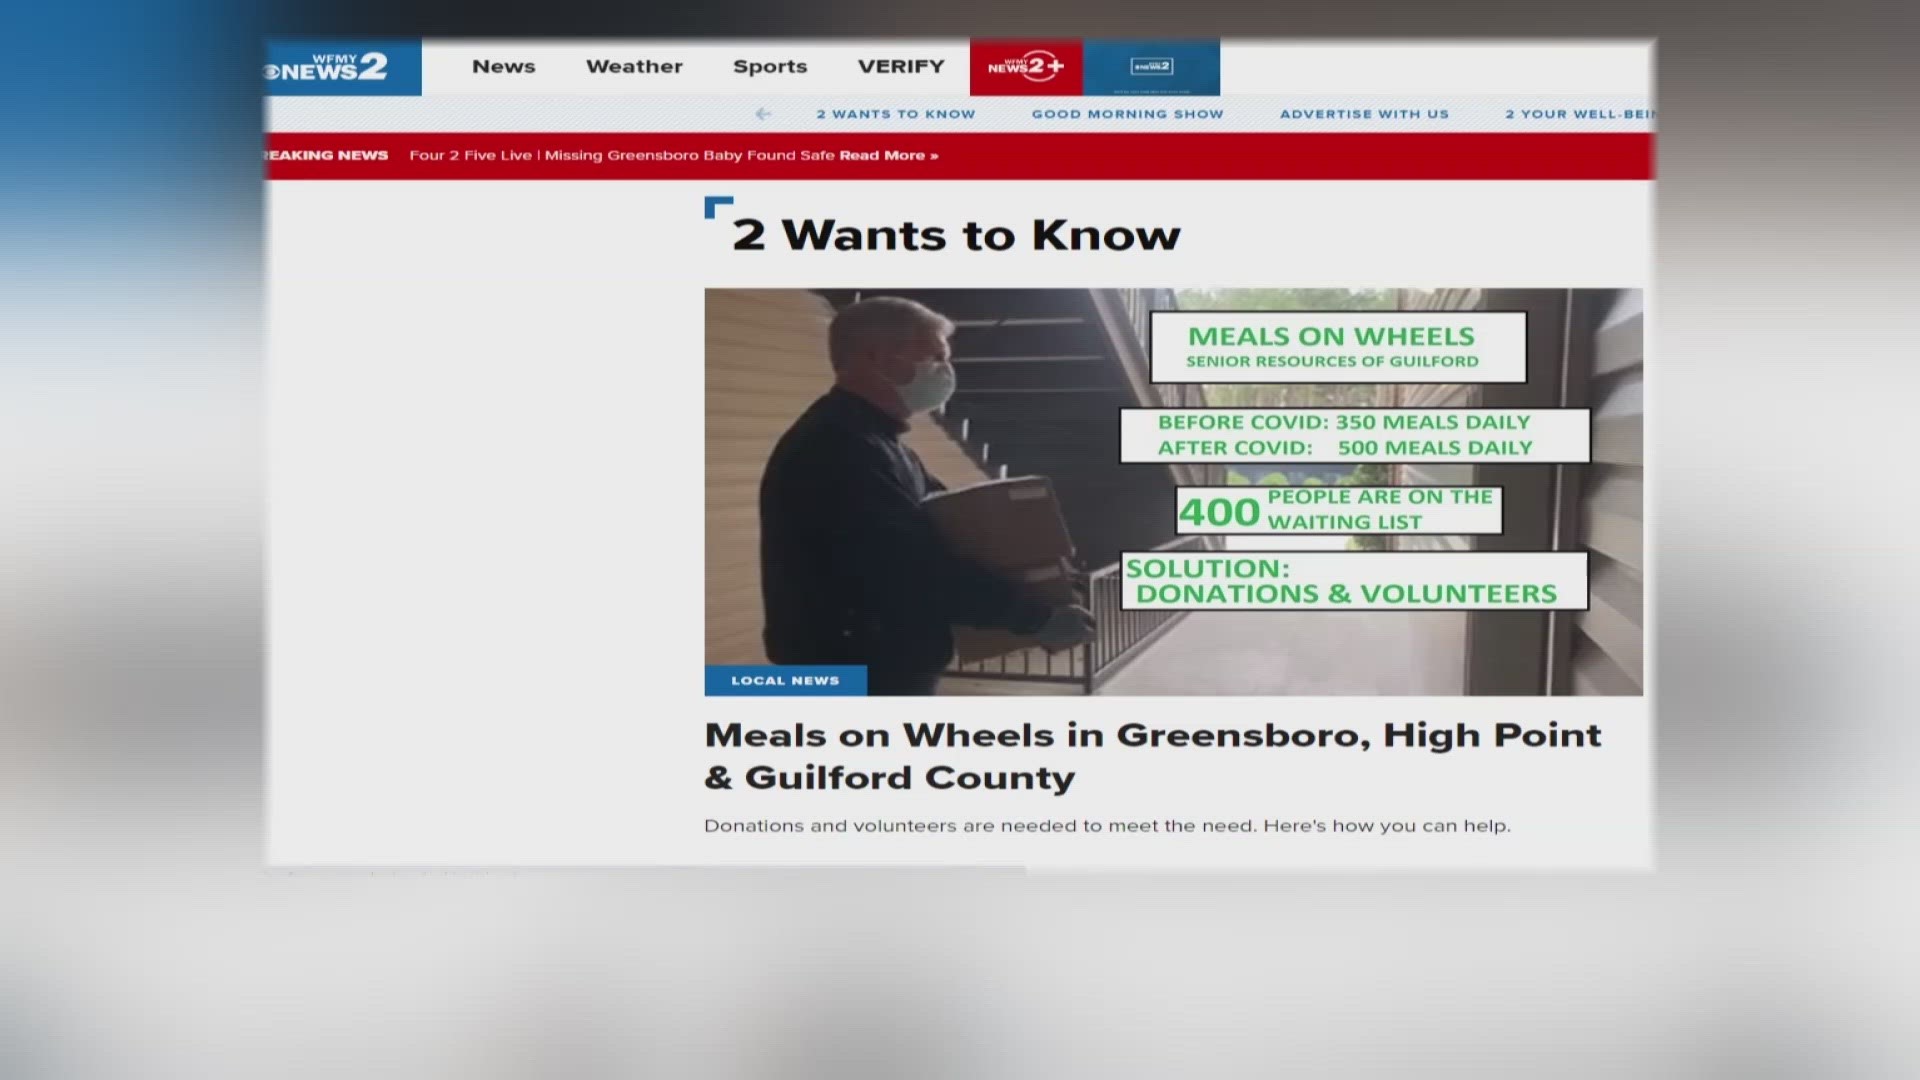 Before the pandemic, Meals on Wheels in Guilford County served 350 meals per day. Now, they serve more than 500 meals per day.